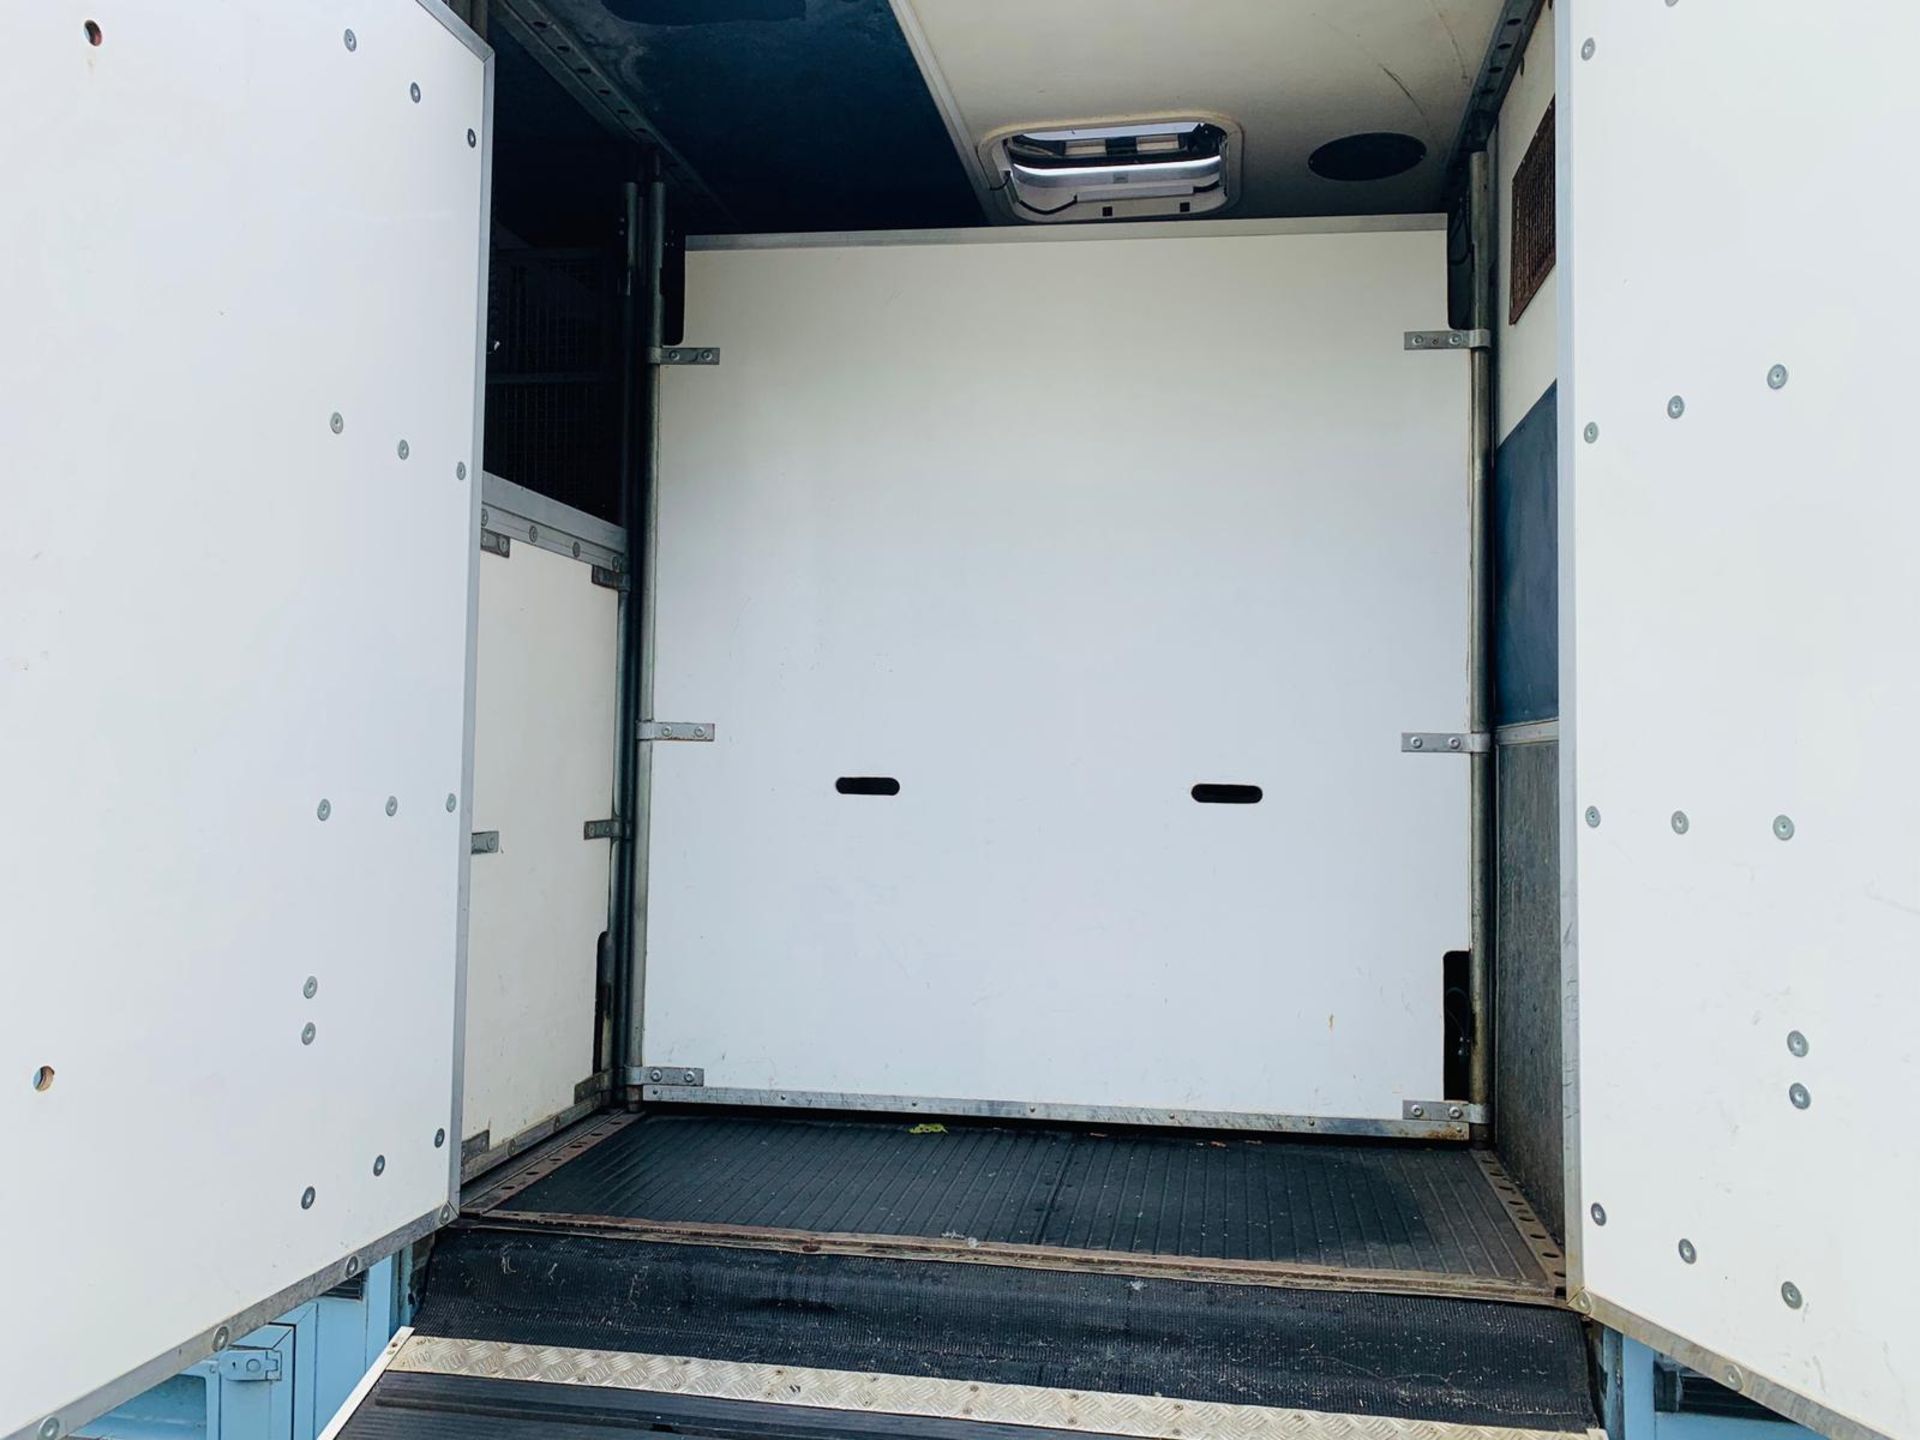 Iveco 110E18 'OLYMPIC' Horsebox 2001 - 6 Speed - Fits 4/6 Forward Facing Horses - Image 18 of 24